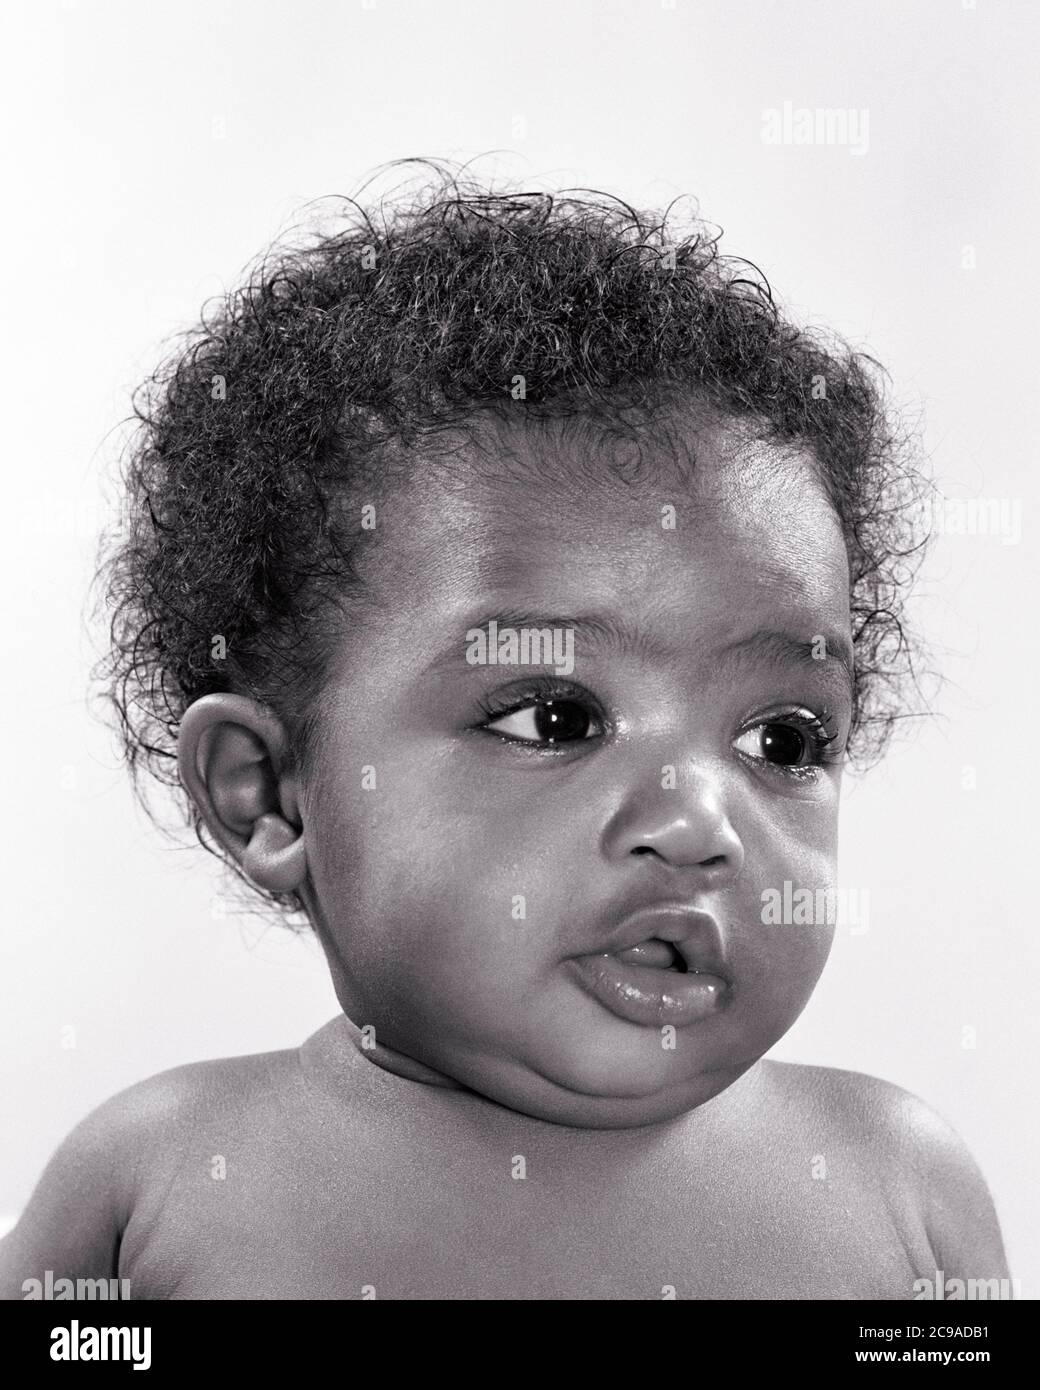 1940s 1950s PORTRAIT CHARMING CUTE WIDE-EYED AFRICAN-AMERICAN BABY GIRL SITTING UPRIGHT LOOKING TO SIDE - n599 HAR001 HARS JUVENILES ATTENTIVE BABY GIRL BLACK AND WHITE HAR001 OLD FASHIONED AFRICAN AMERICANS Stock Photo